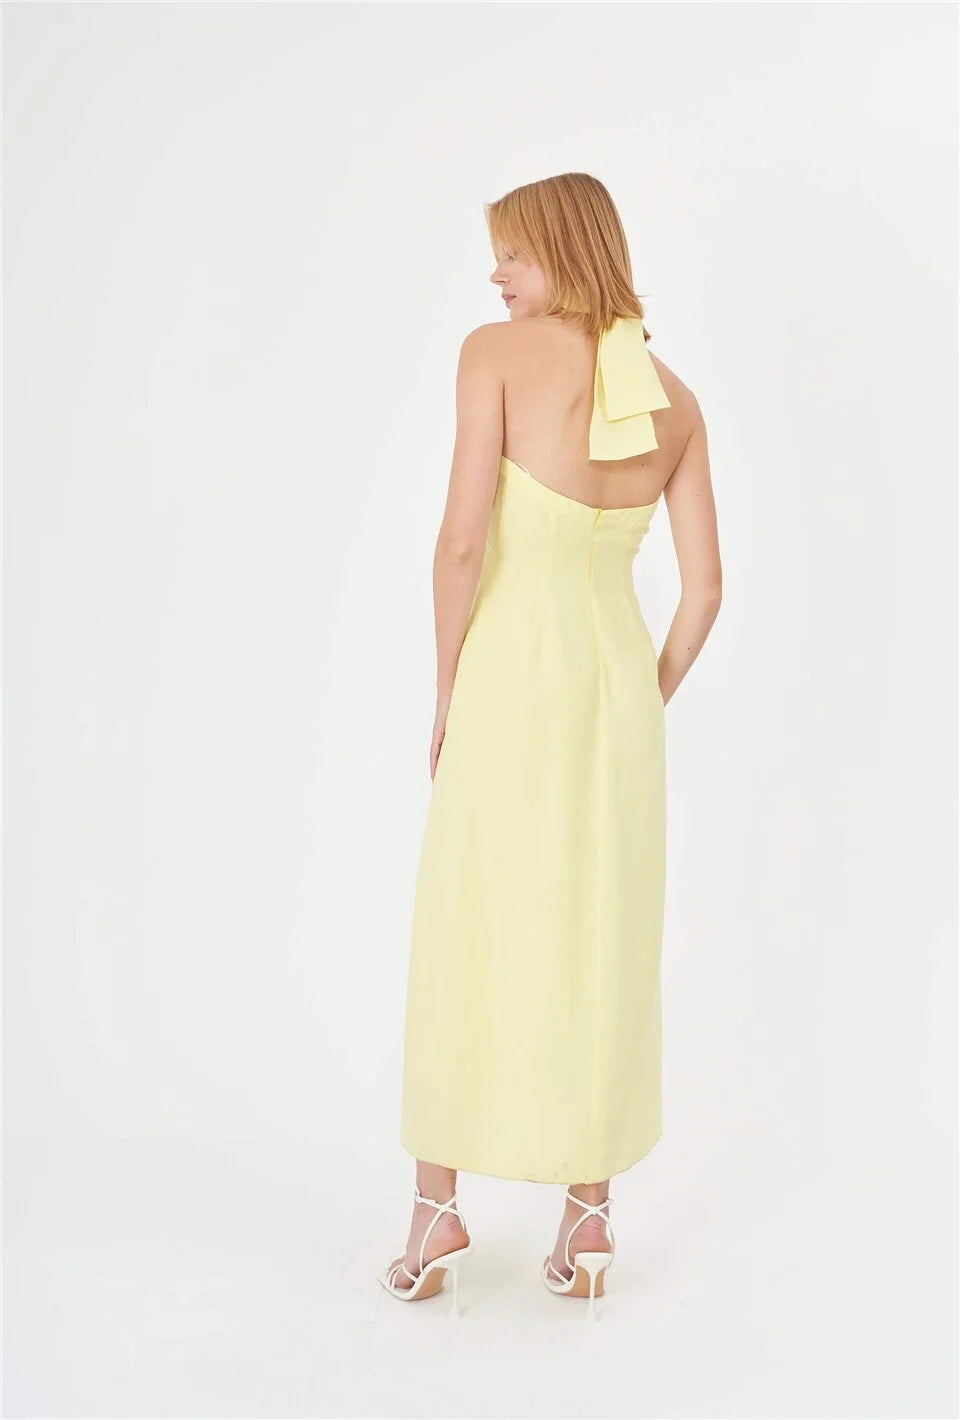 A stunning yellow summer dress featuring a halter neck design, made from lightweight bio-based and organic fabric. This dress adds a vibrant pop of color to your wardrobe and is suitable for various summer occasions such as beach outings, pool parties, gatherings, and street style looks.